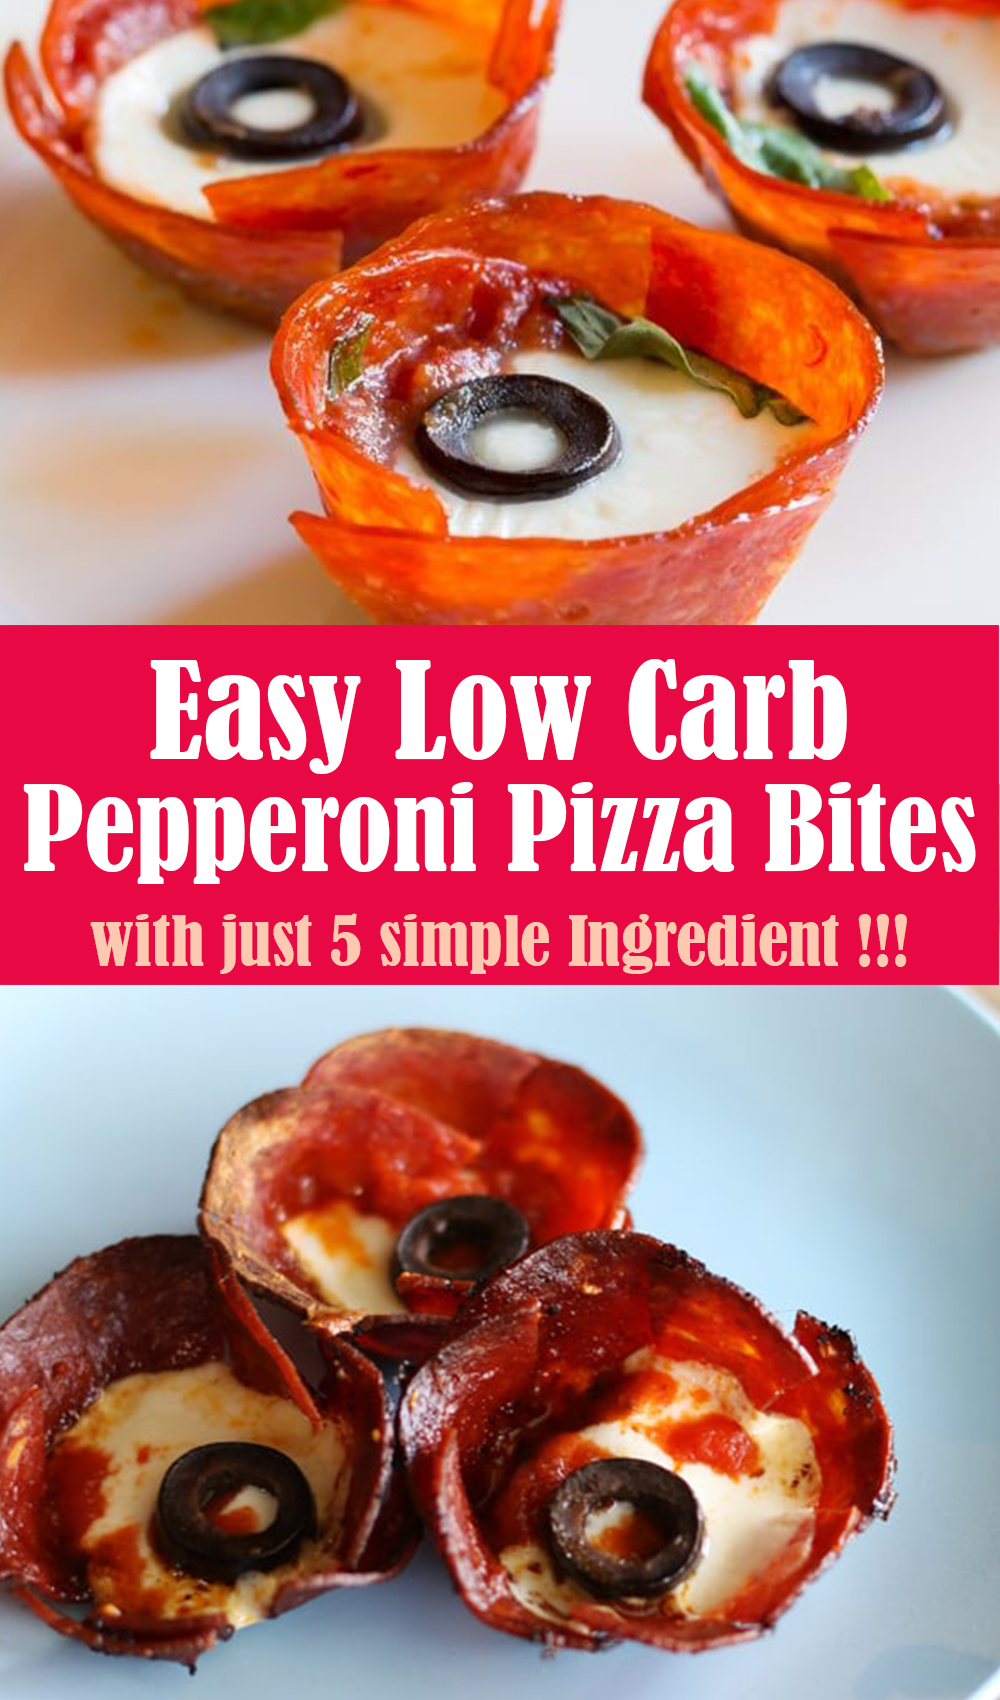 Easy Low Carb Pepperoni Pizza Bites Recipe